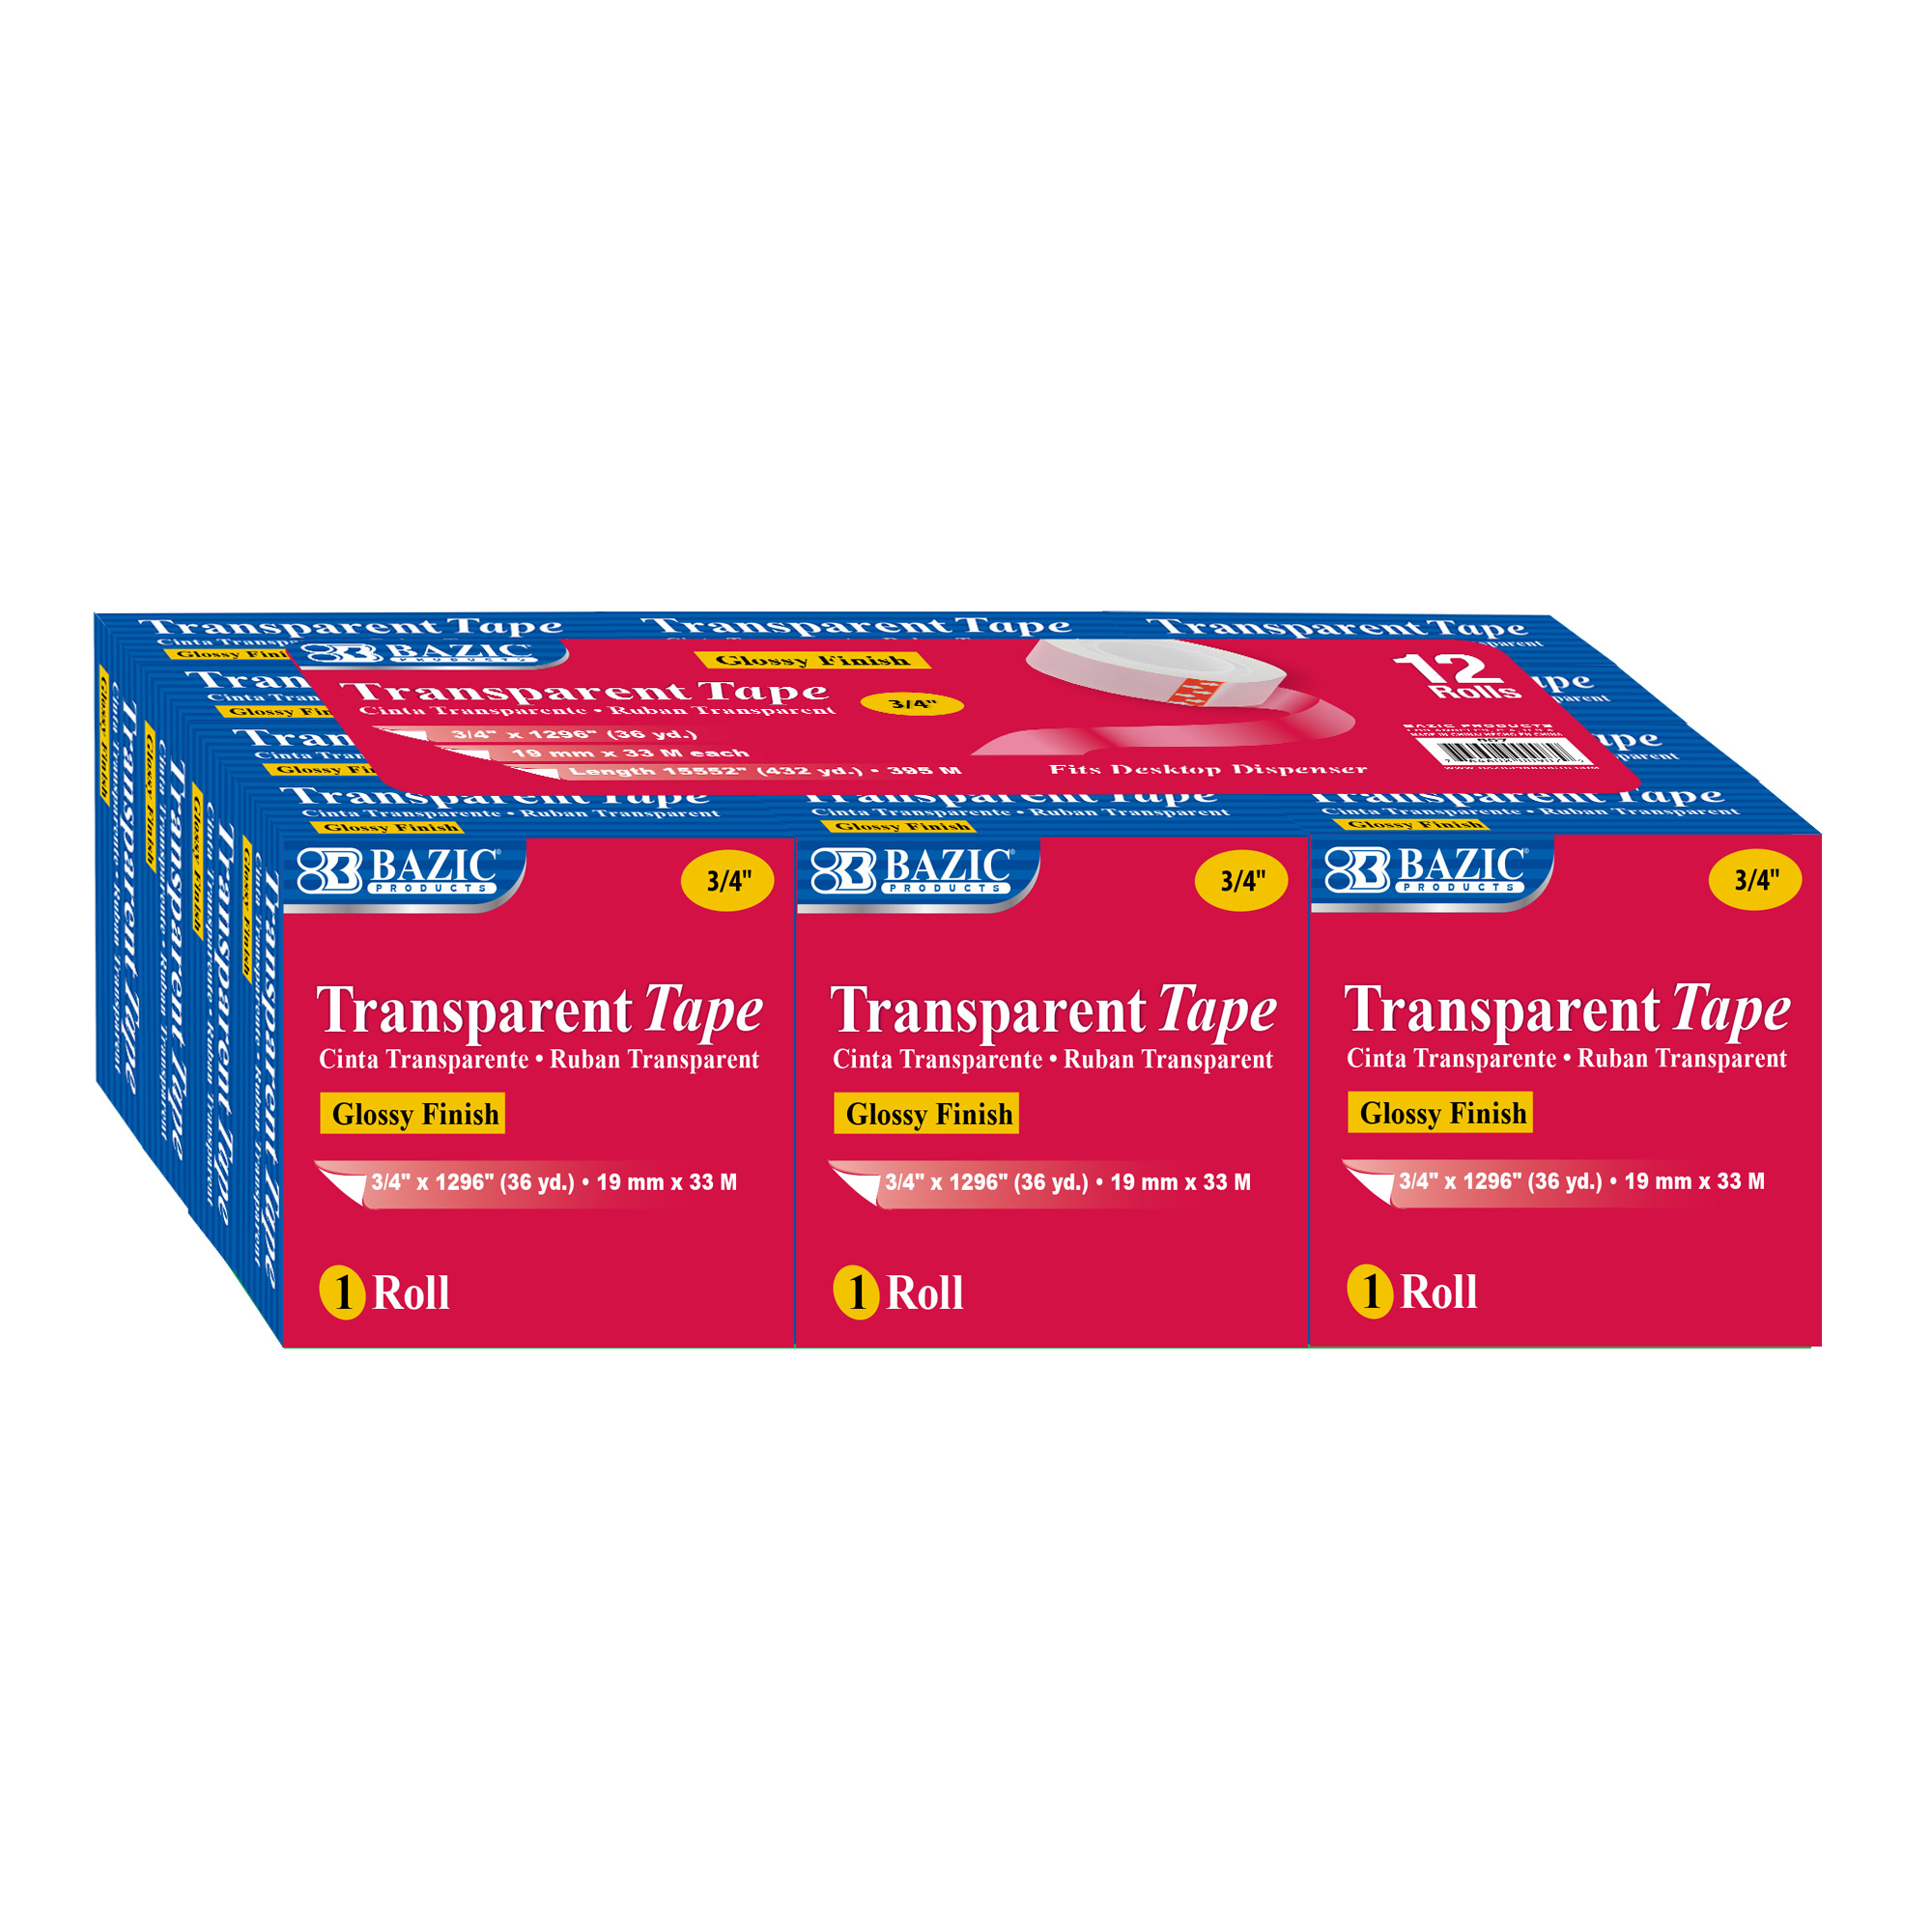 Business Source Transparent Glossy Tape Refills, 3/4 x 1296, 1 Core, 1  Each